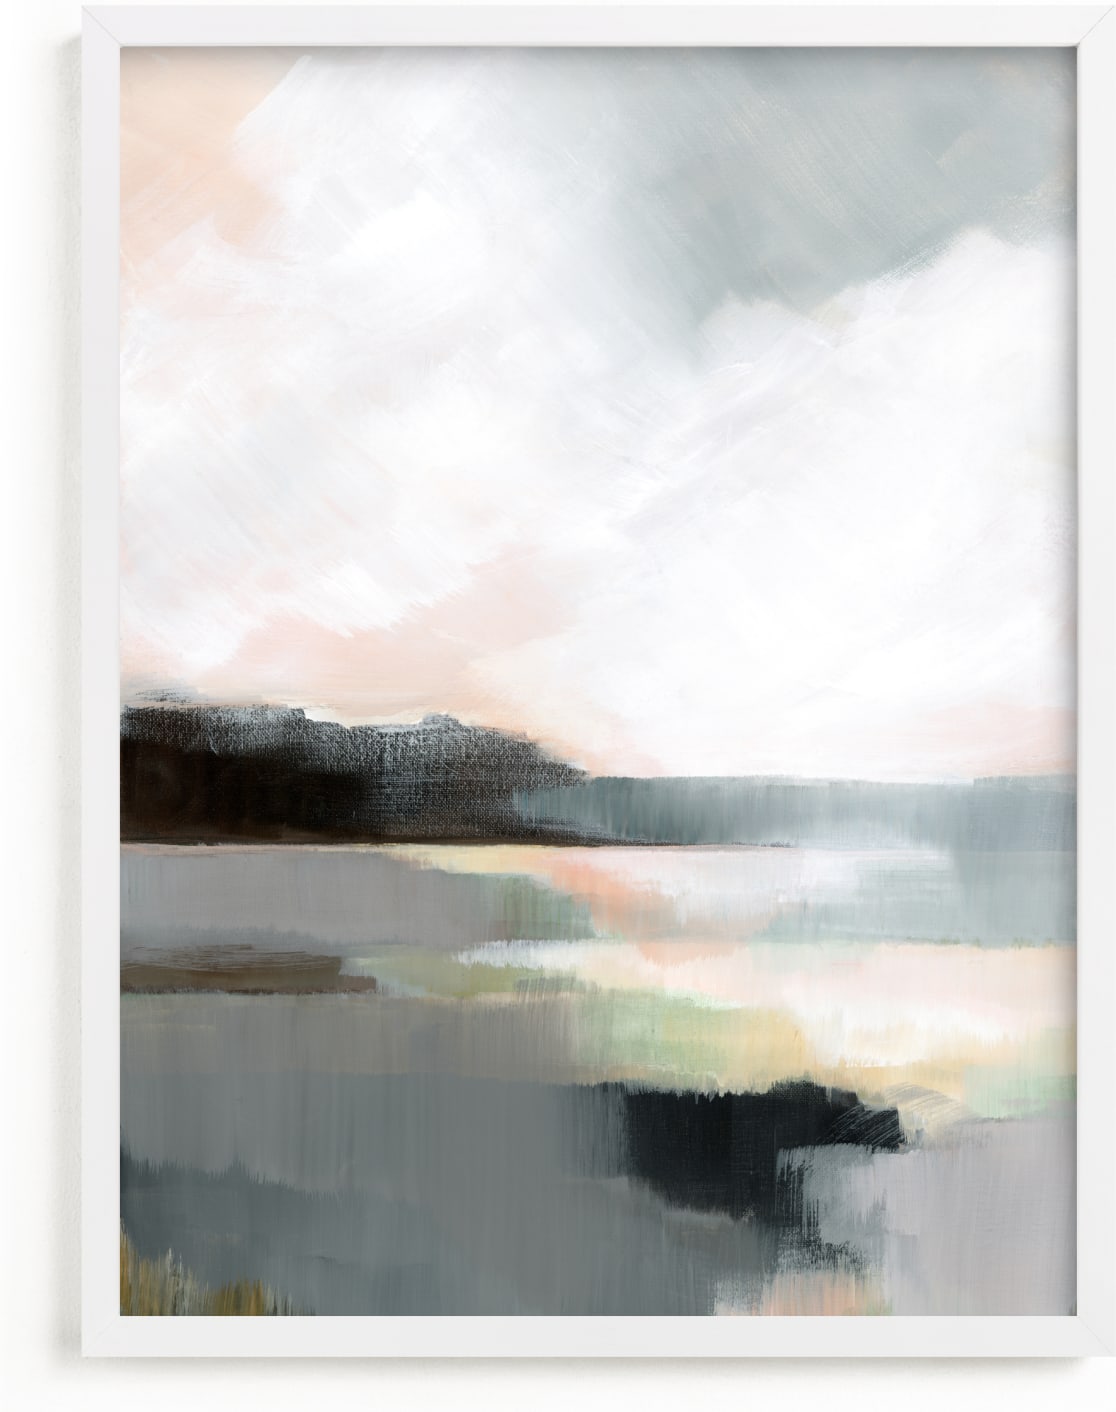 This is a colorful art by AlisonJerry called Sunrise in Grey.